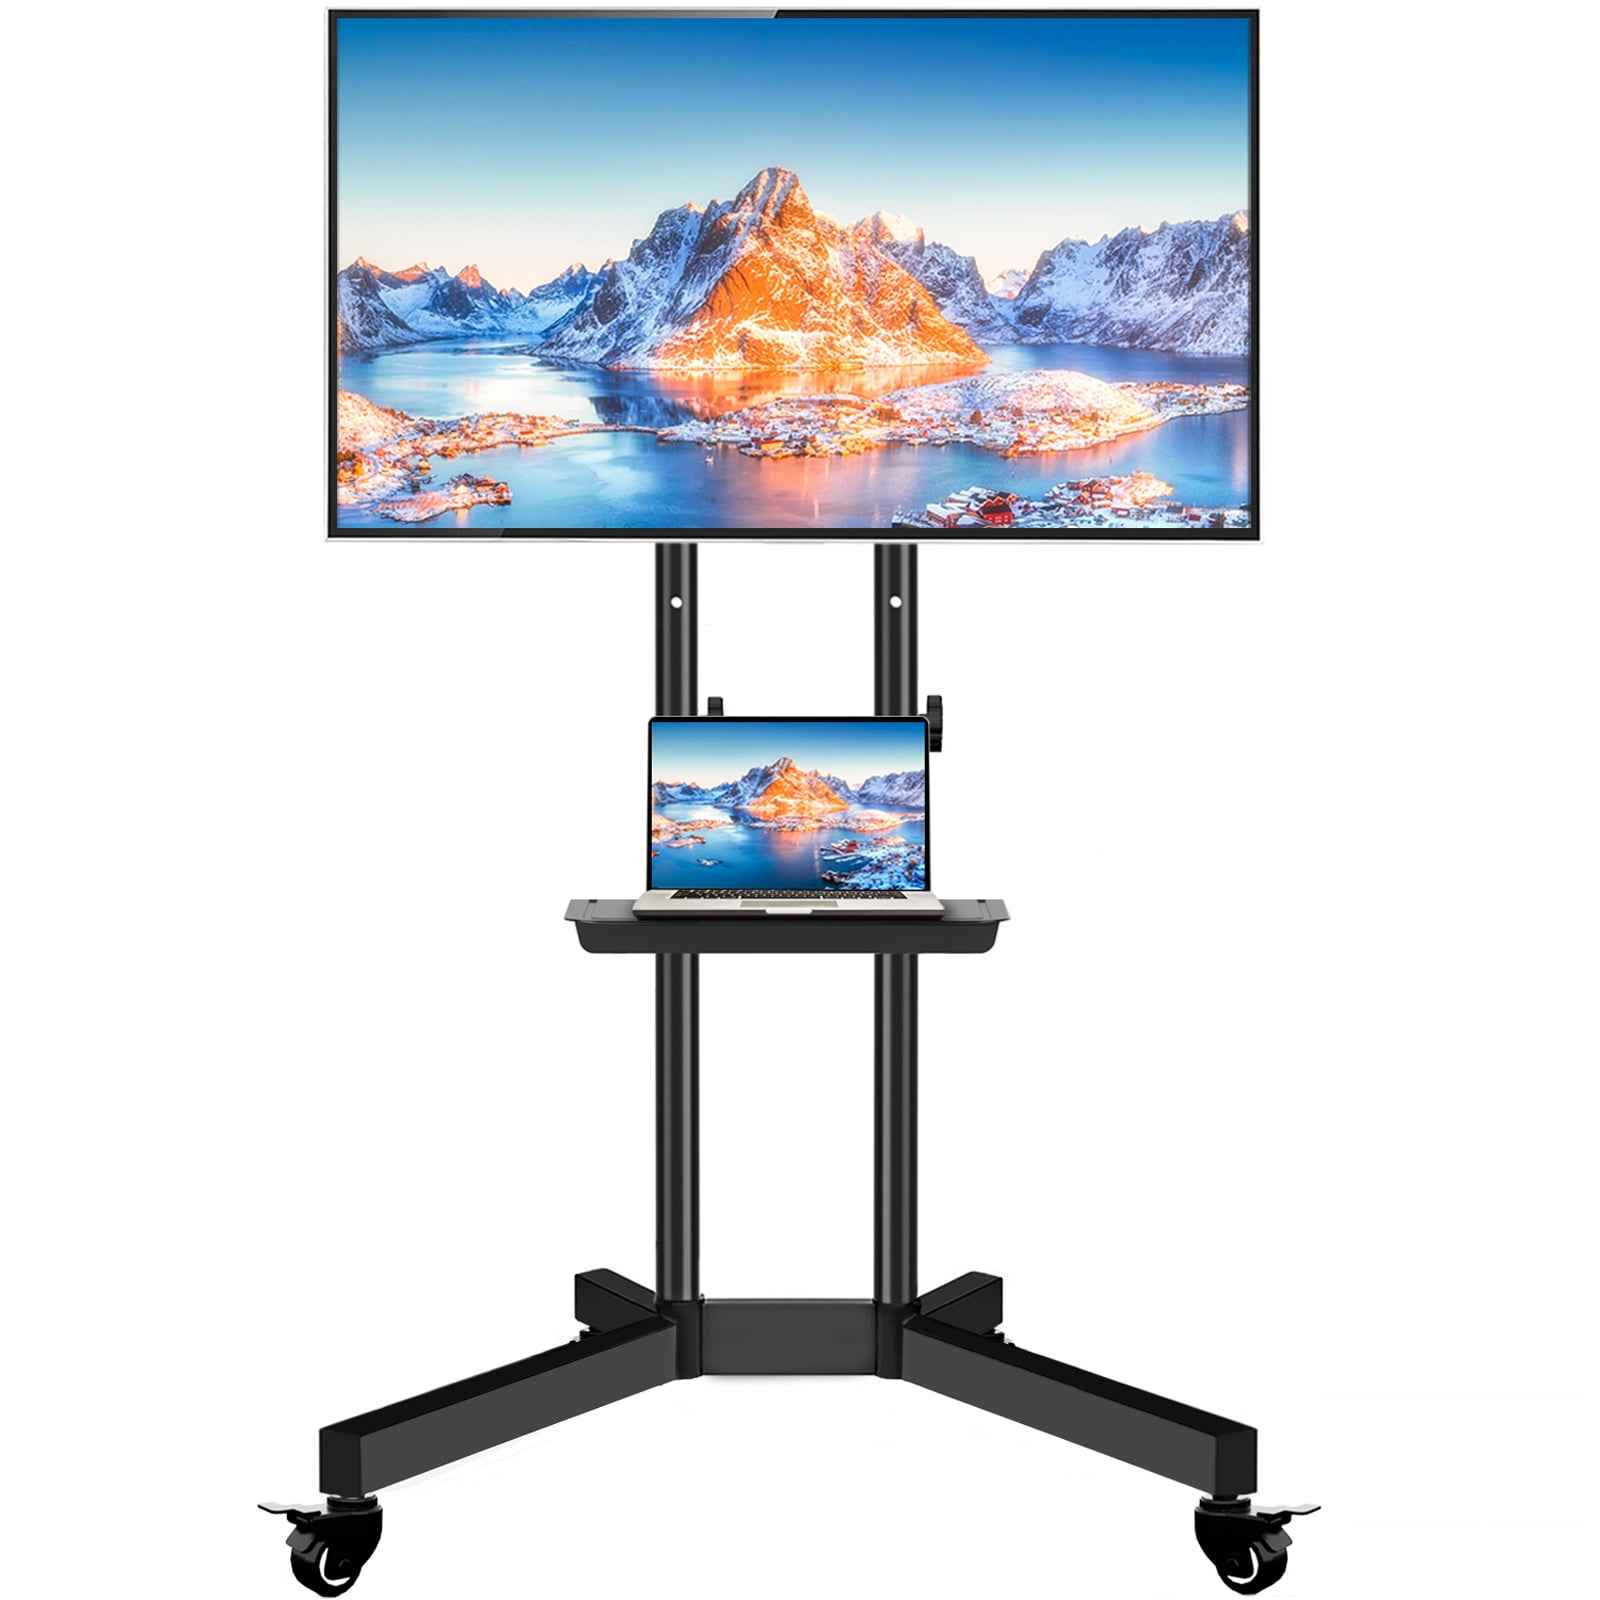 Swivel Floor TV Stand with Mount for 32 37 42 47 50 55 60 65 inch LCD LED 1U 